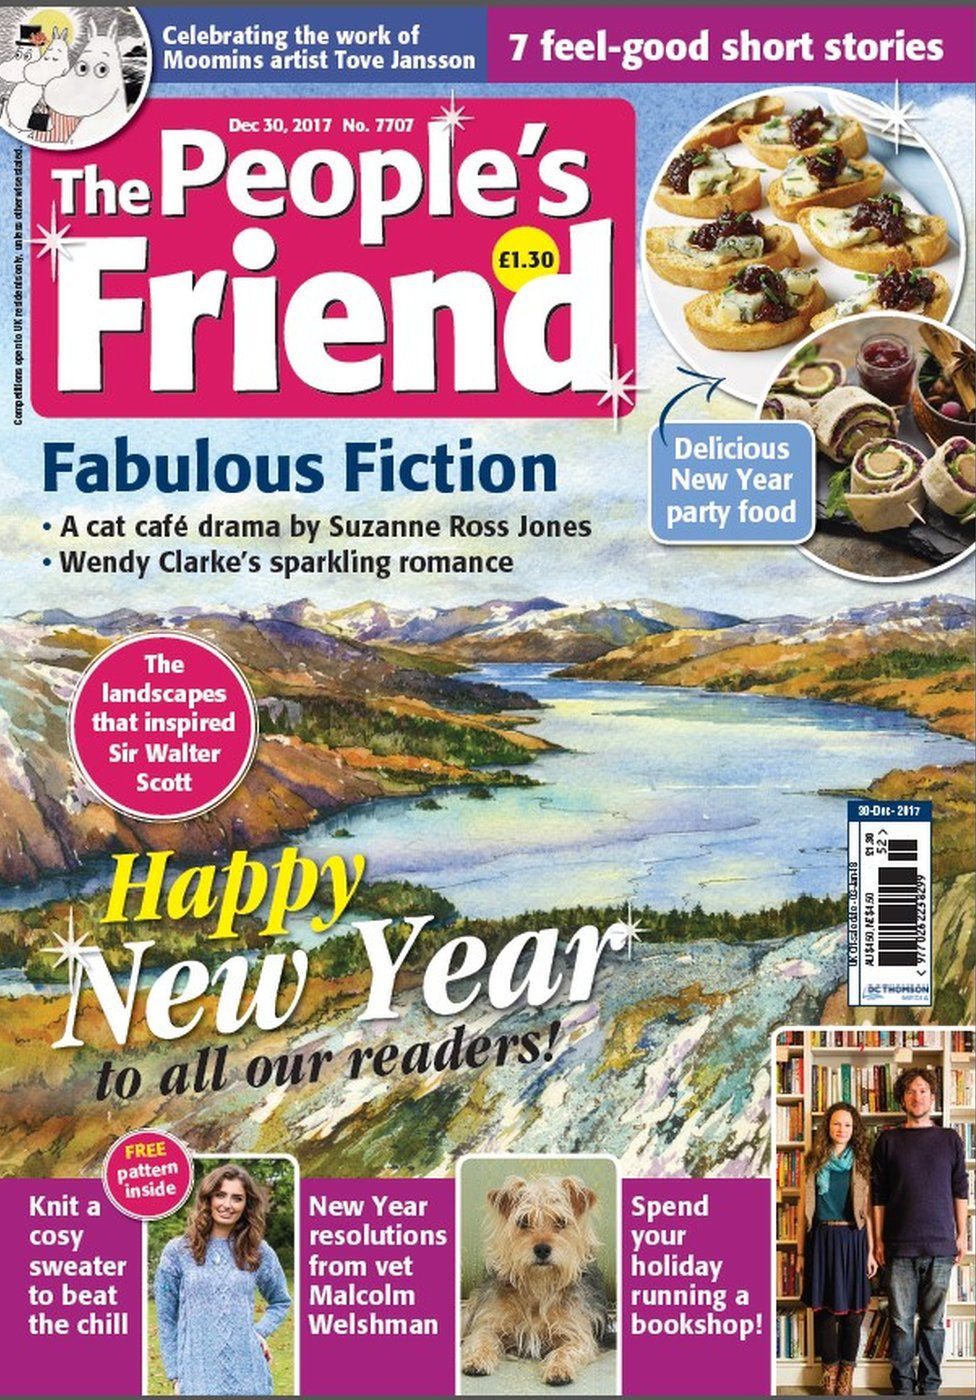 the latest edition of the people's friend (30 December 2017)